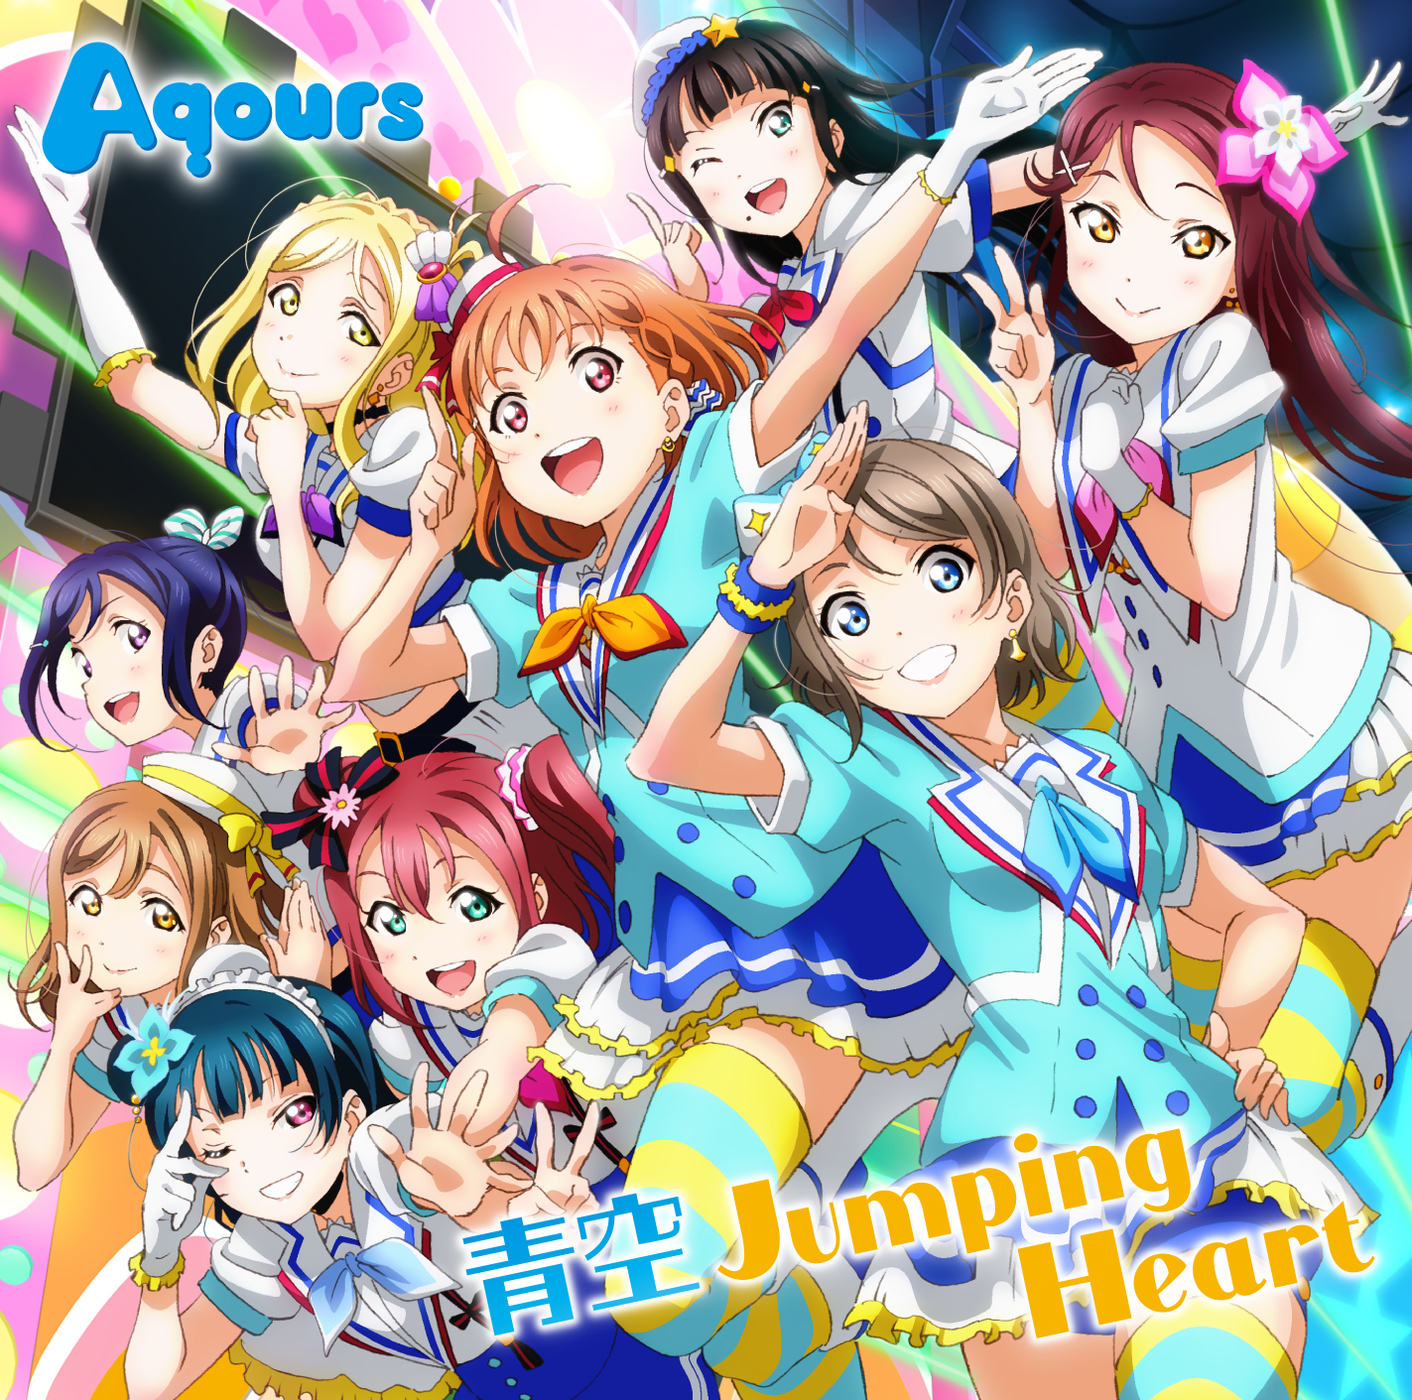 Image result for aozora jumping heart album cover